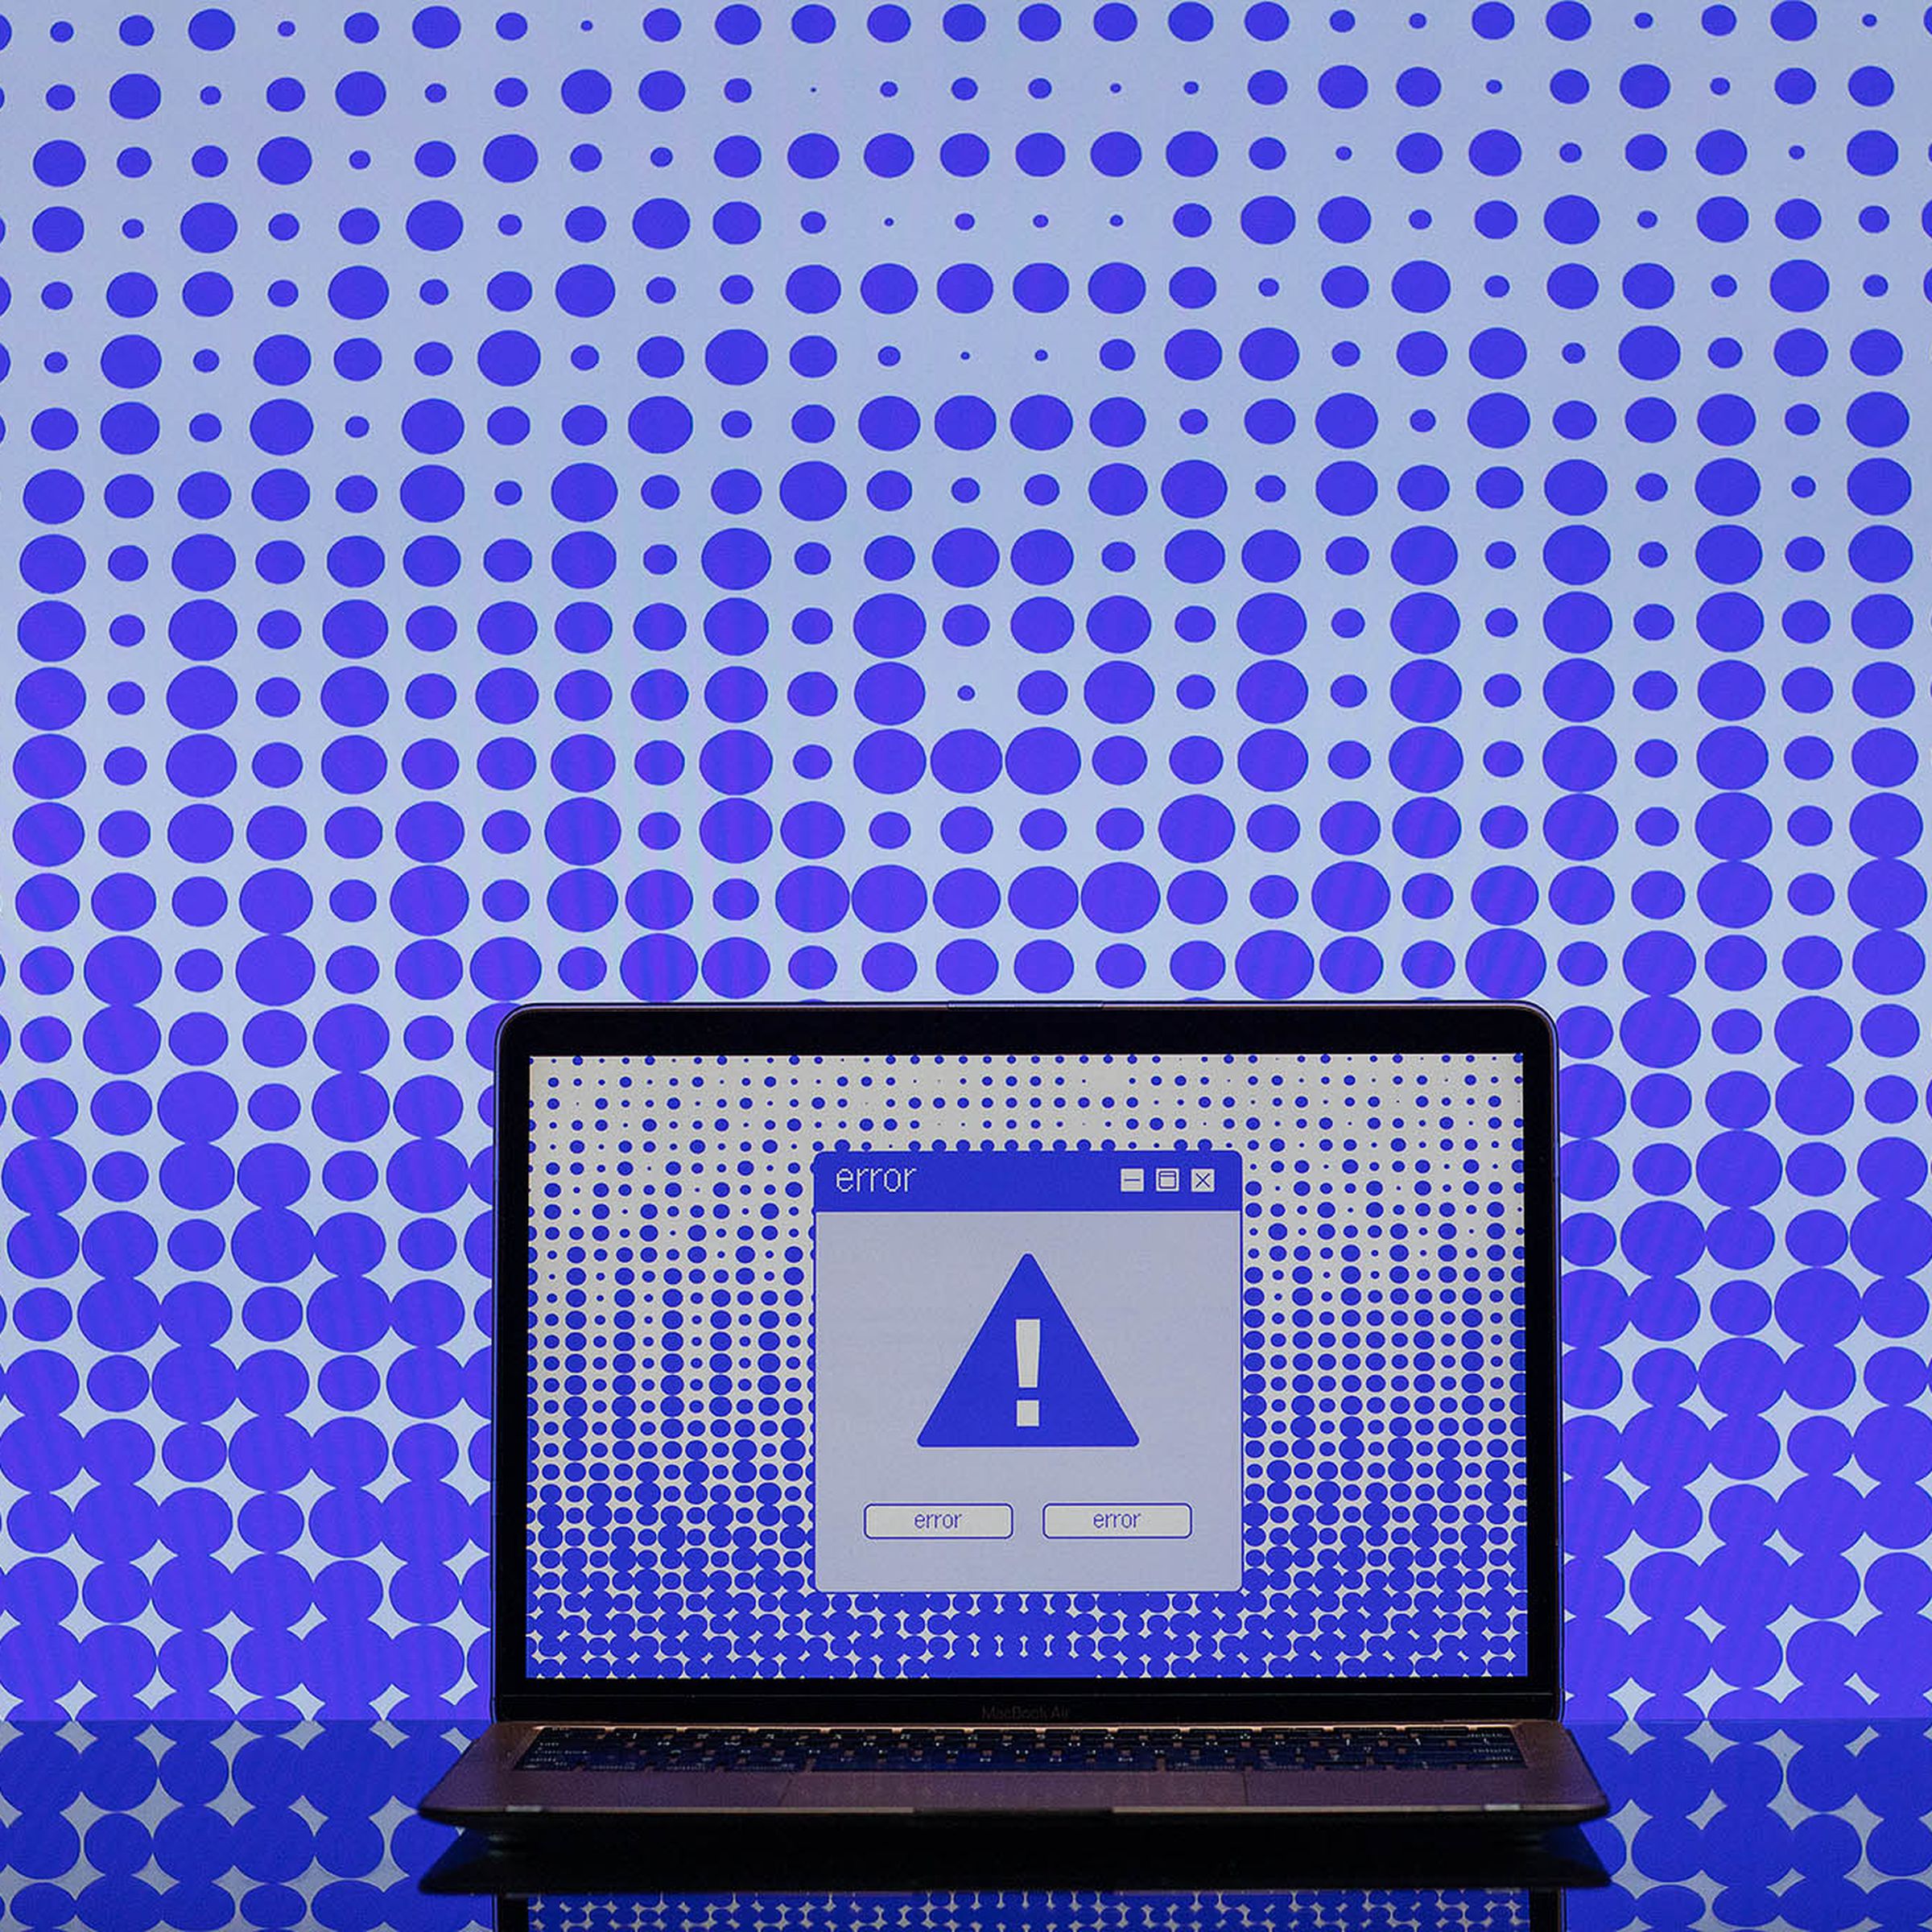 Illustration of a computer screen with a blue exclamation point on it and an error box.